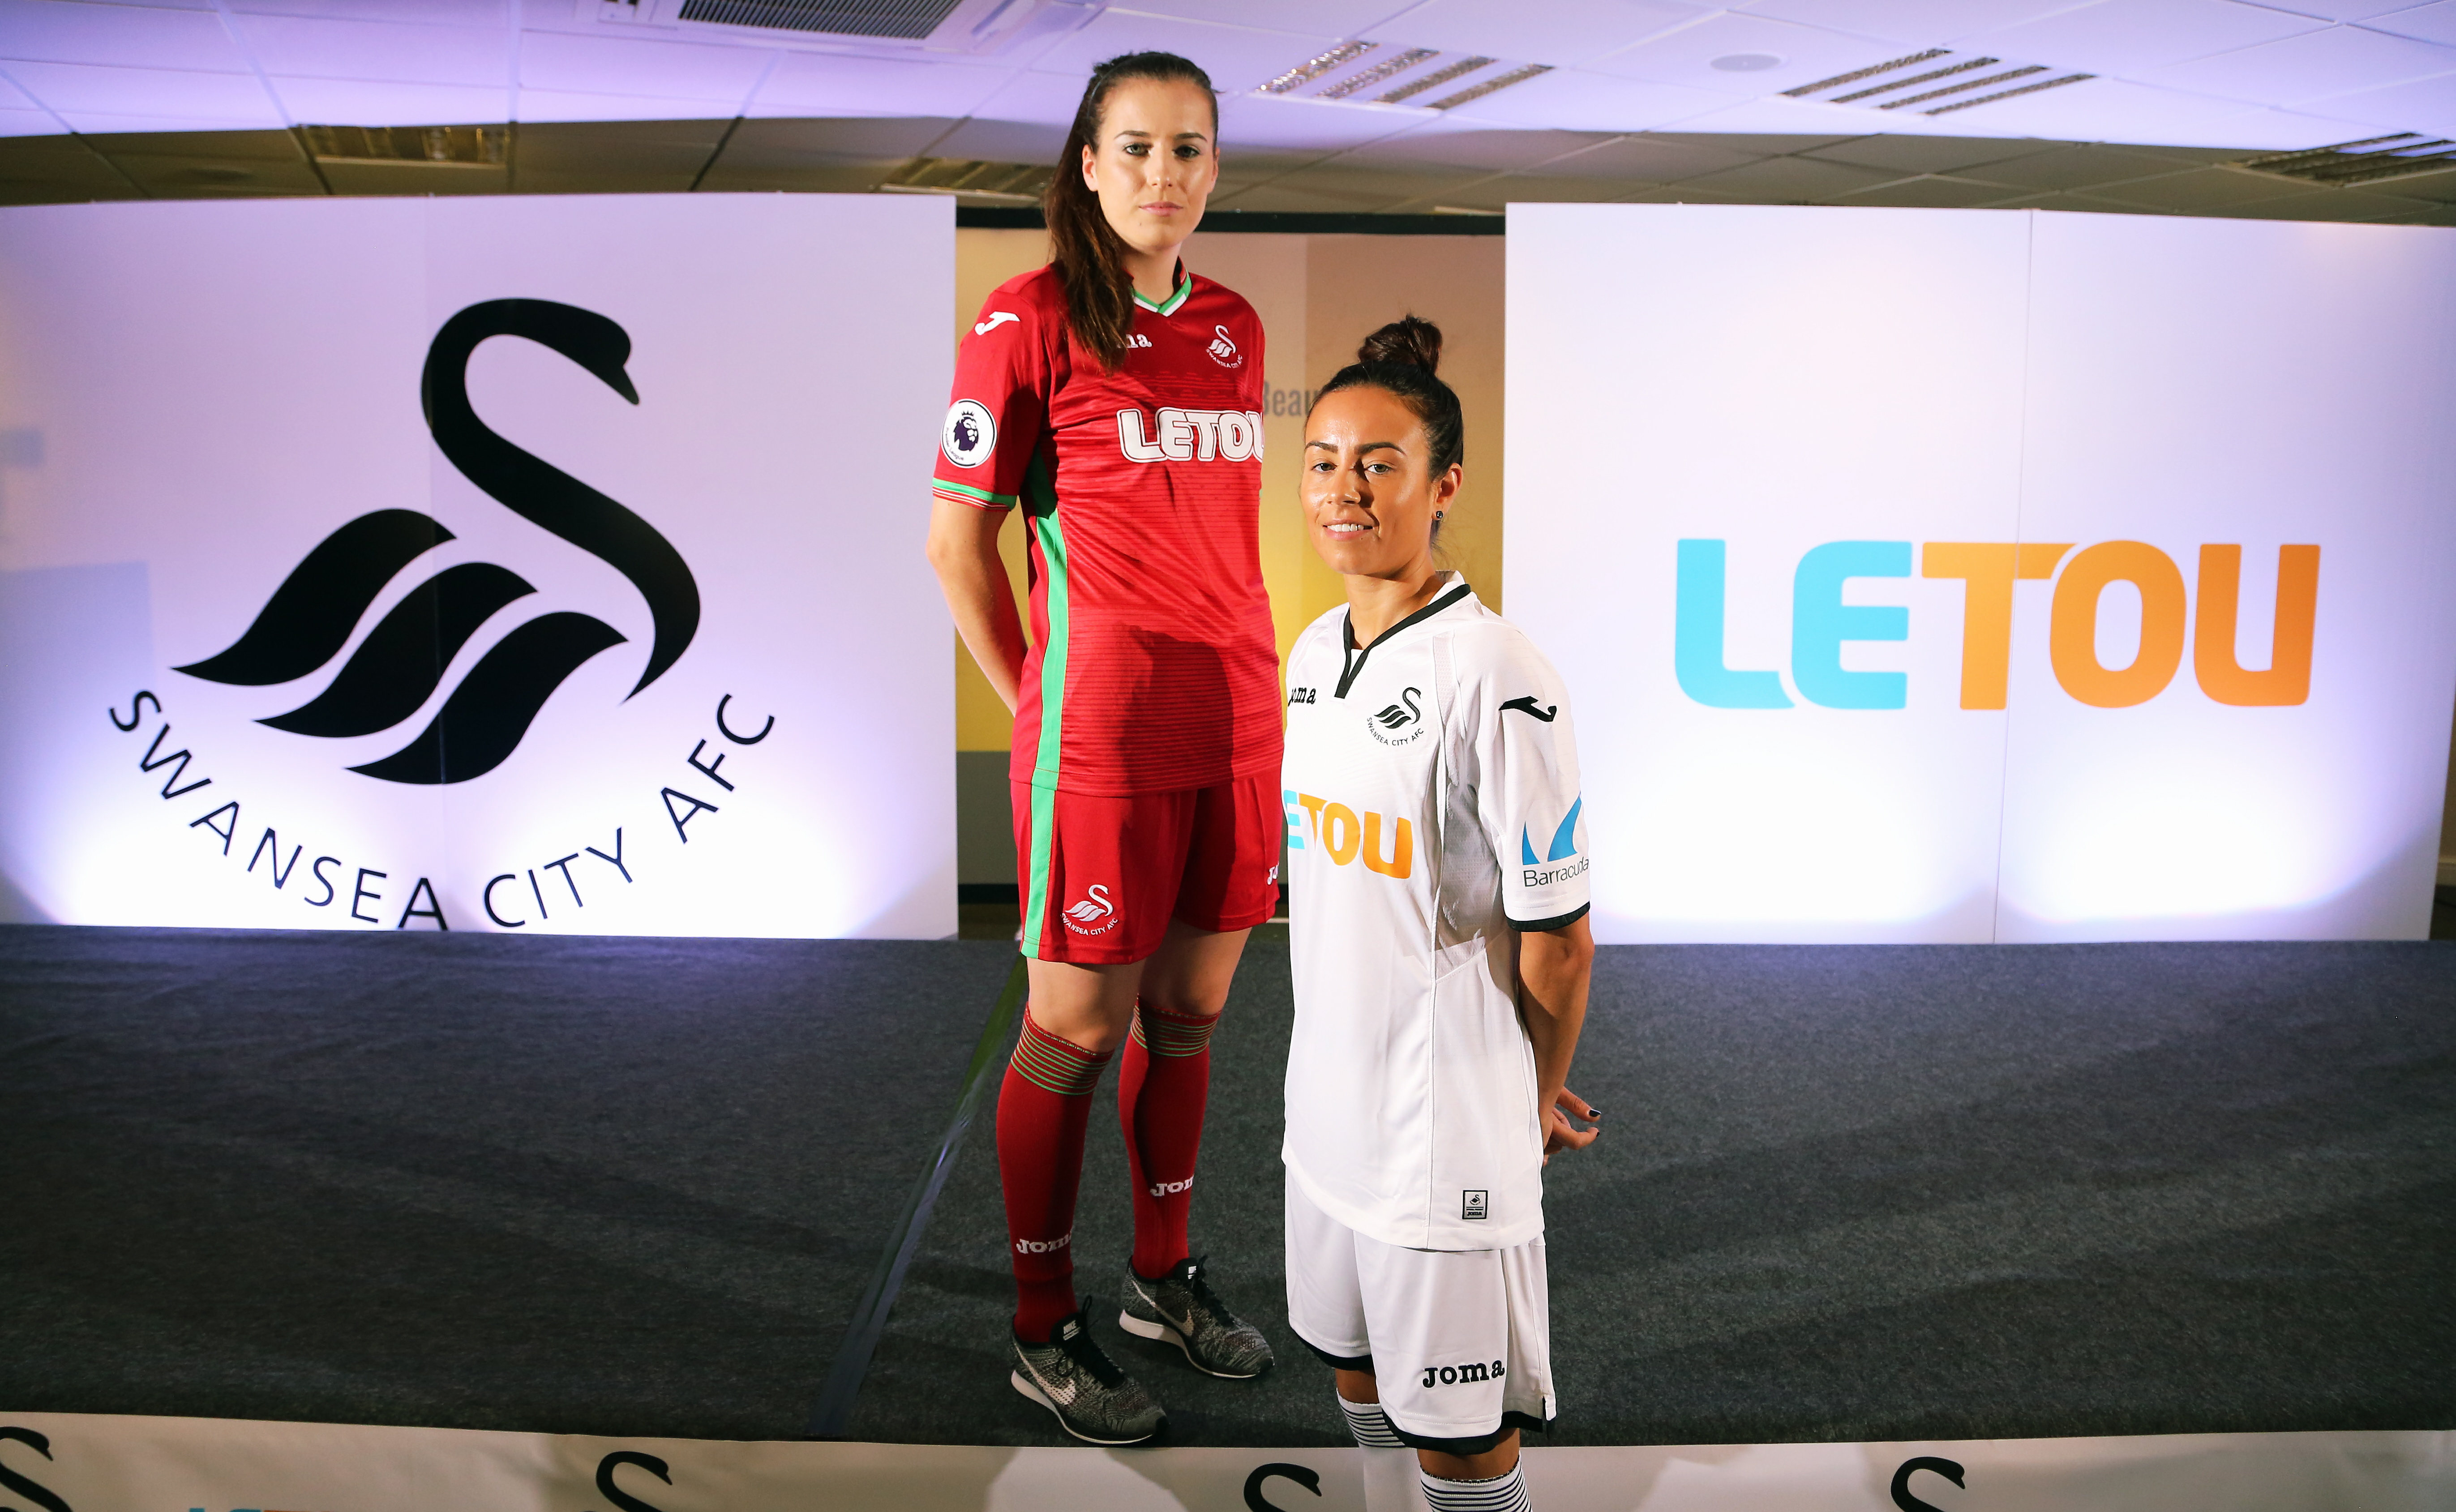 Pictured: Katy Hosford (RED) and Alicia Powe (WHITE) of the Swansea City FC Ladies' team model the home and away kits. Monday 19 June 2017 Re: Swansea City FC launch their new home and away kits and announce Letou as their new sponsor at the Liberty Stadium, Swansea, Wales, UK.